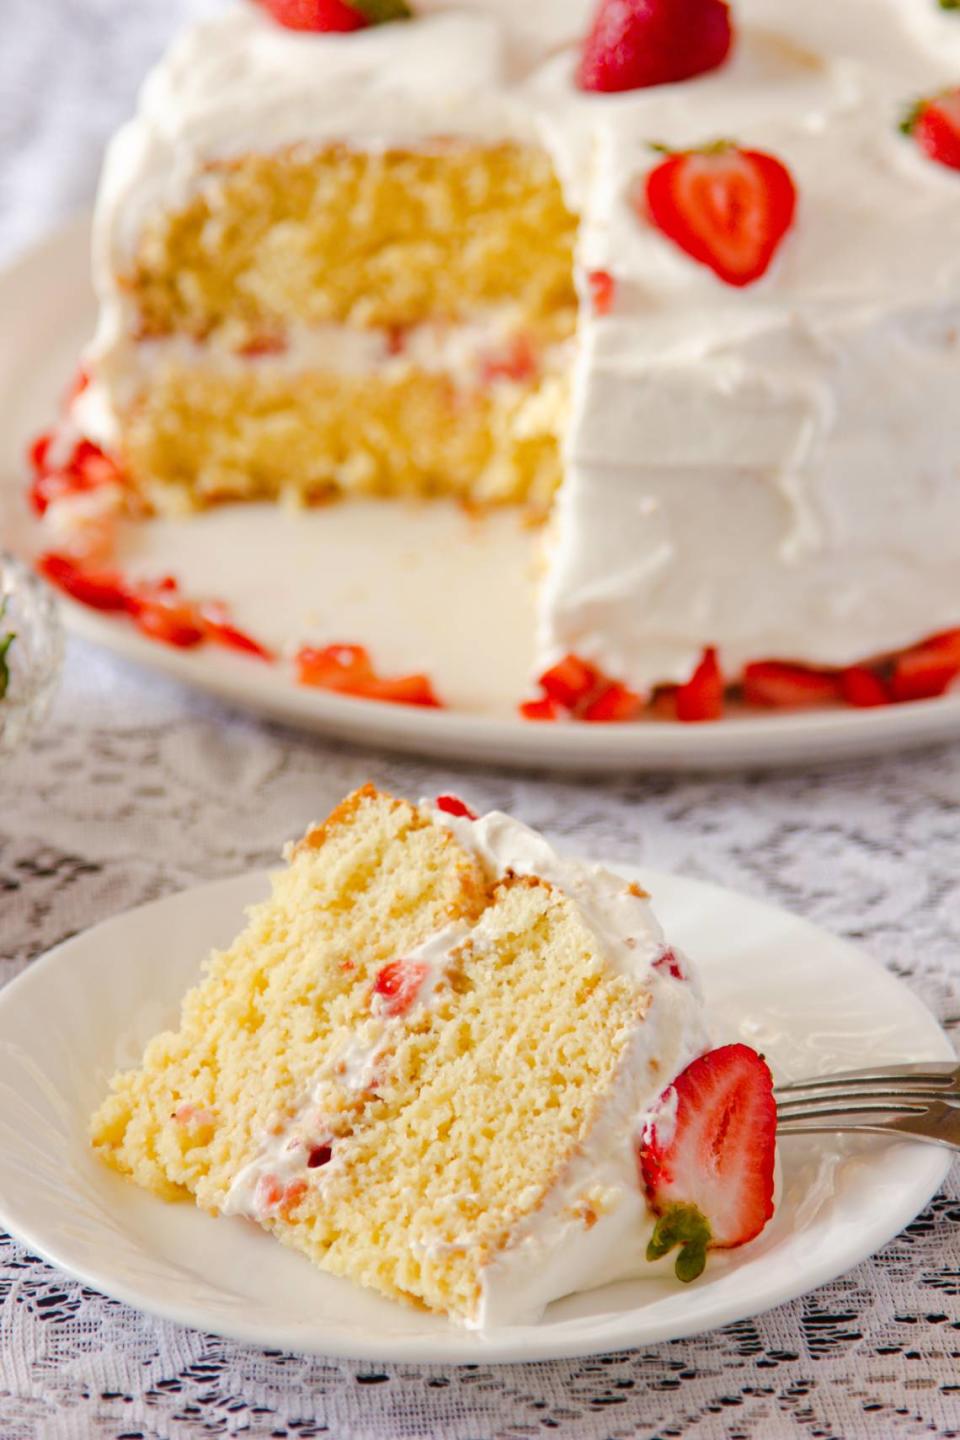 Tres leches cake is one of Silvia Martinez’s favorite recipes. The Morro Bay resident was the winner of the first season of PBS's “The Great American Recipe."